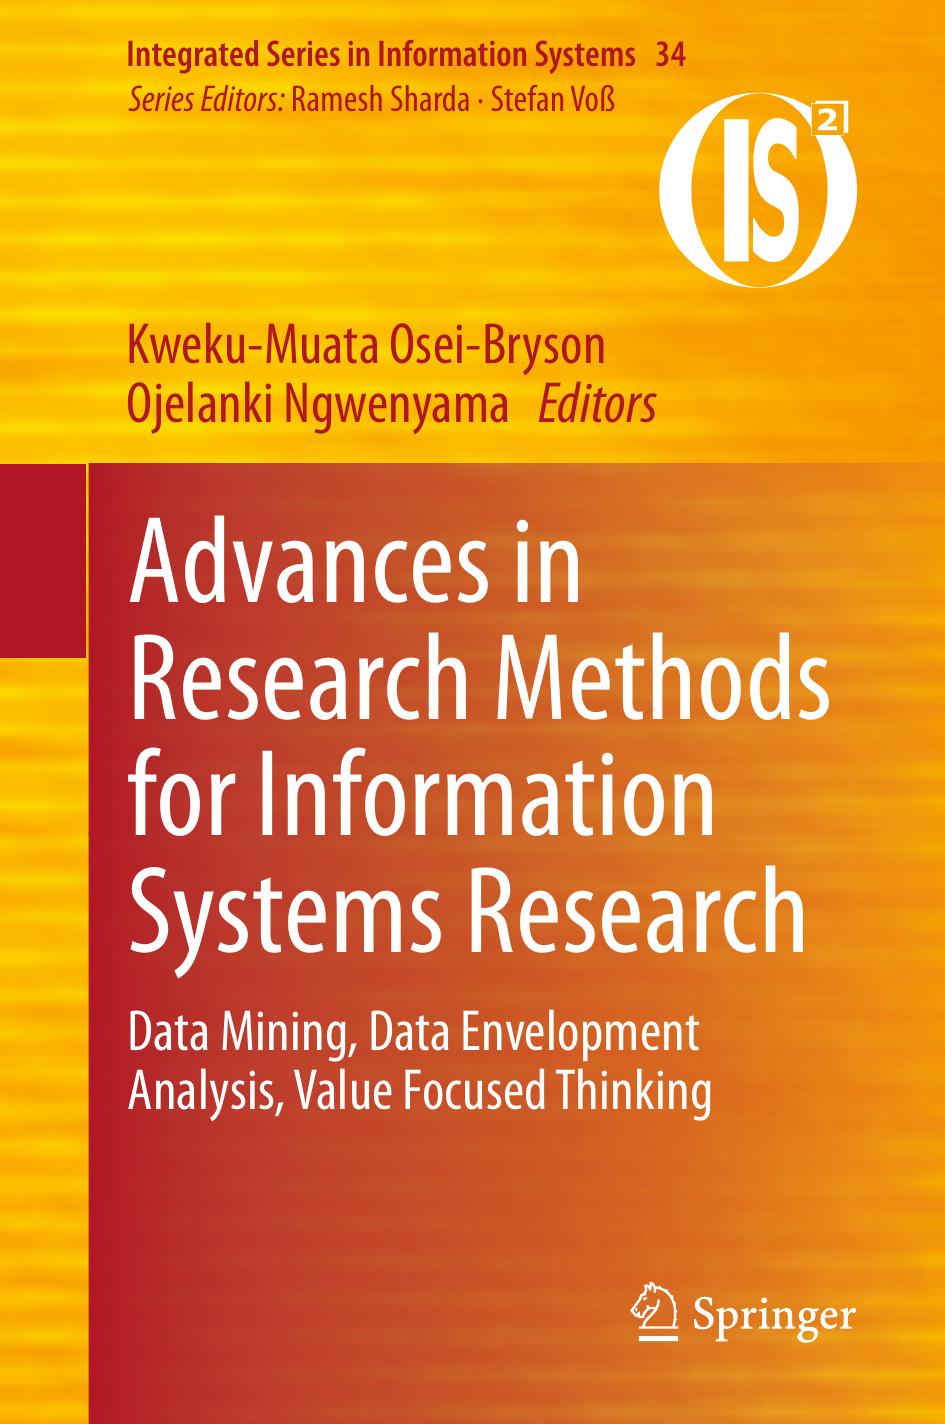 Advances in Research Methods for Information Systems Research  Data Mining, Data Envelopment Analysis 2014 ( PDFDrive )